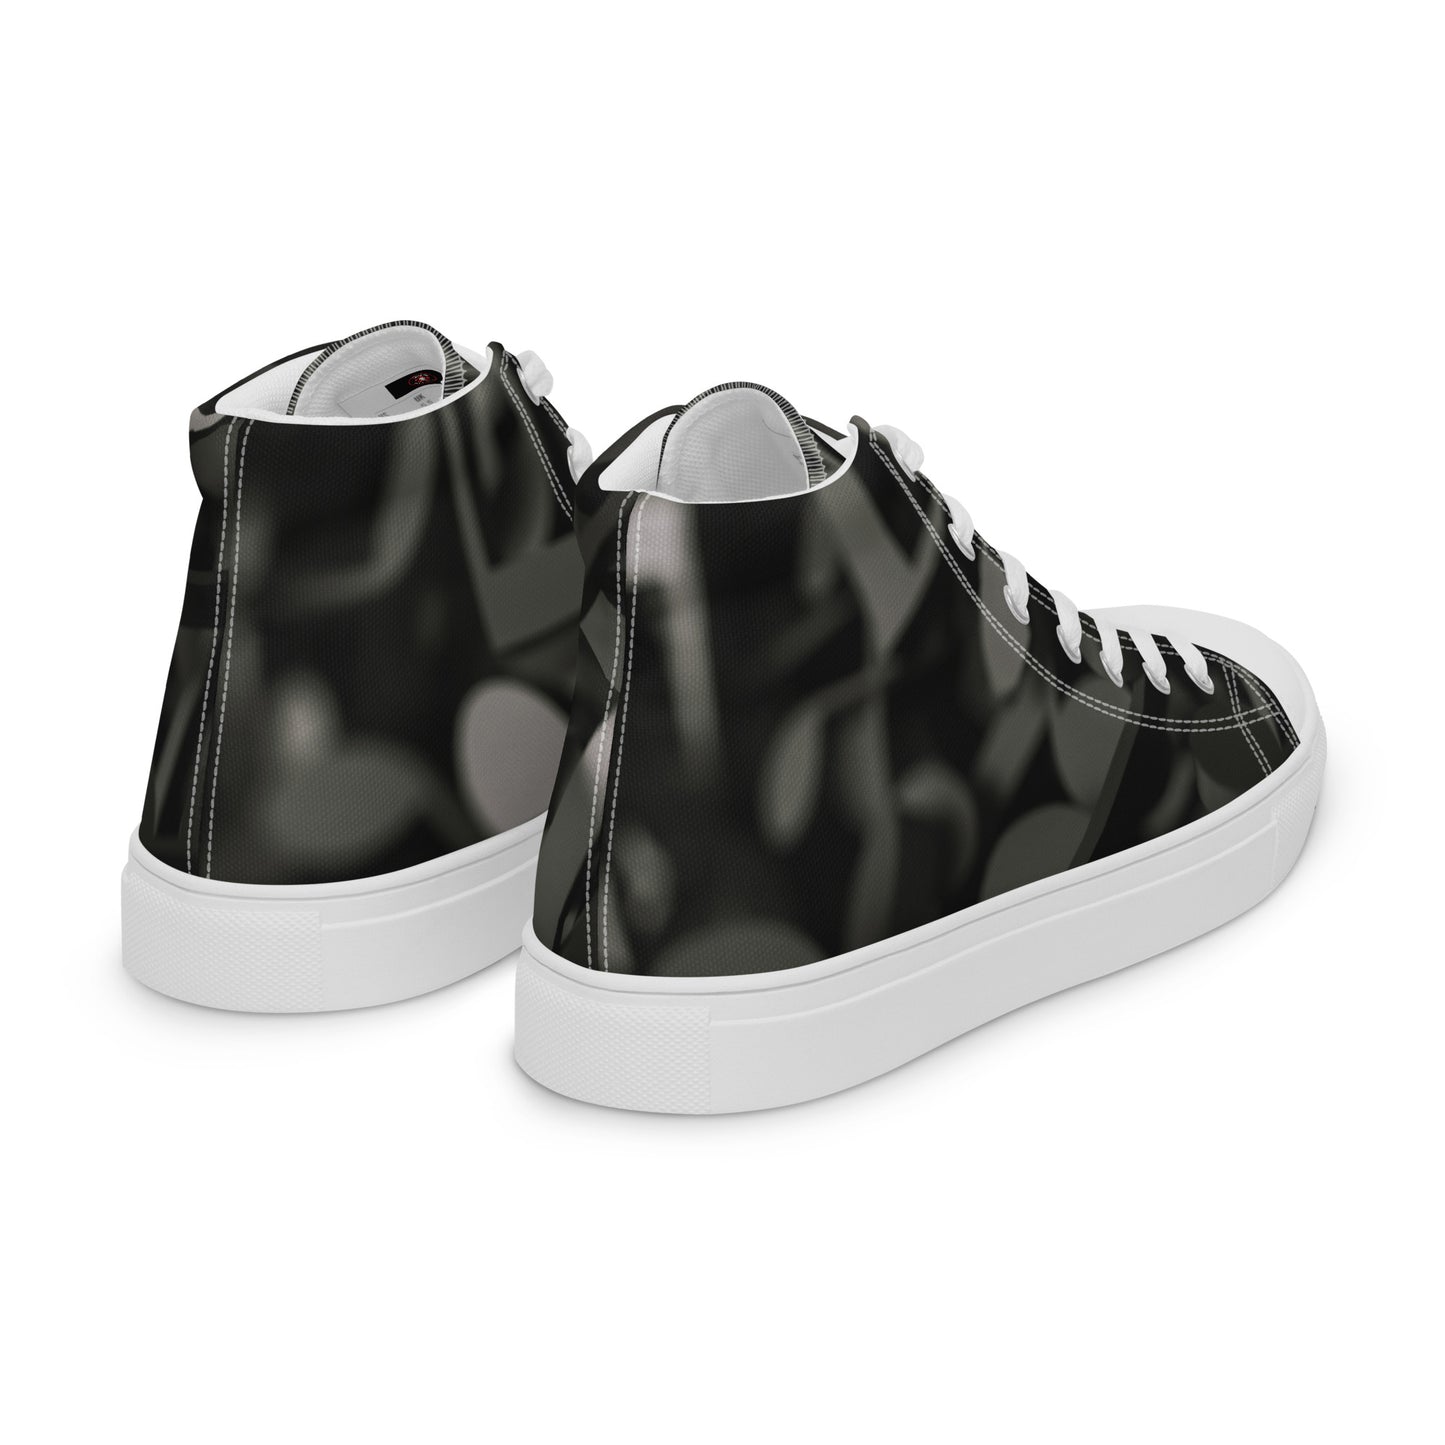 Musicale high top canvas shoes